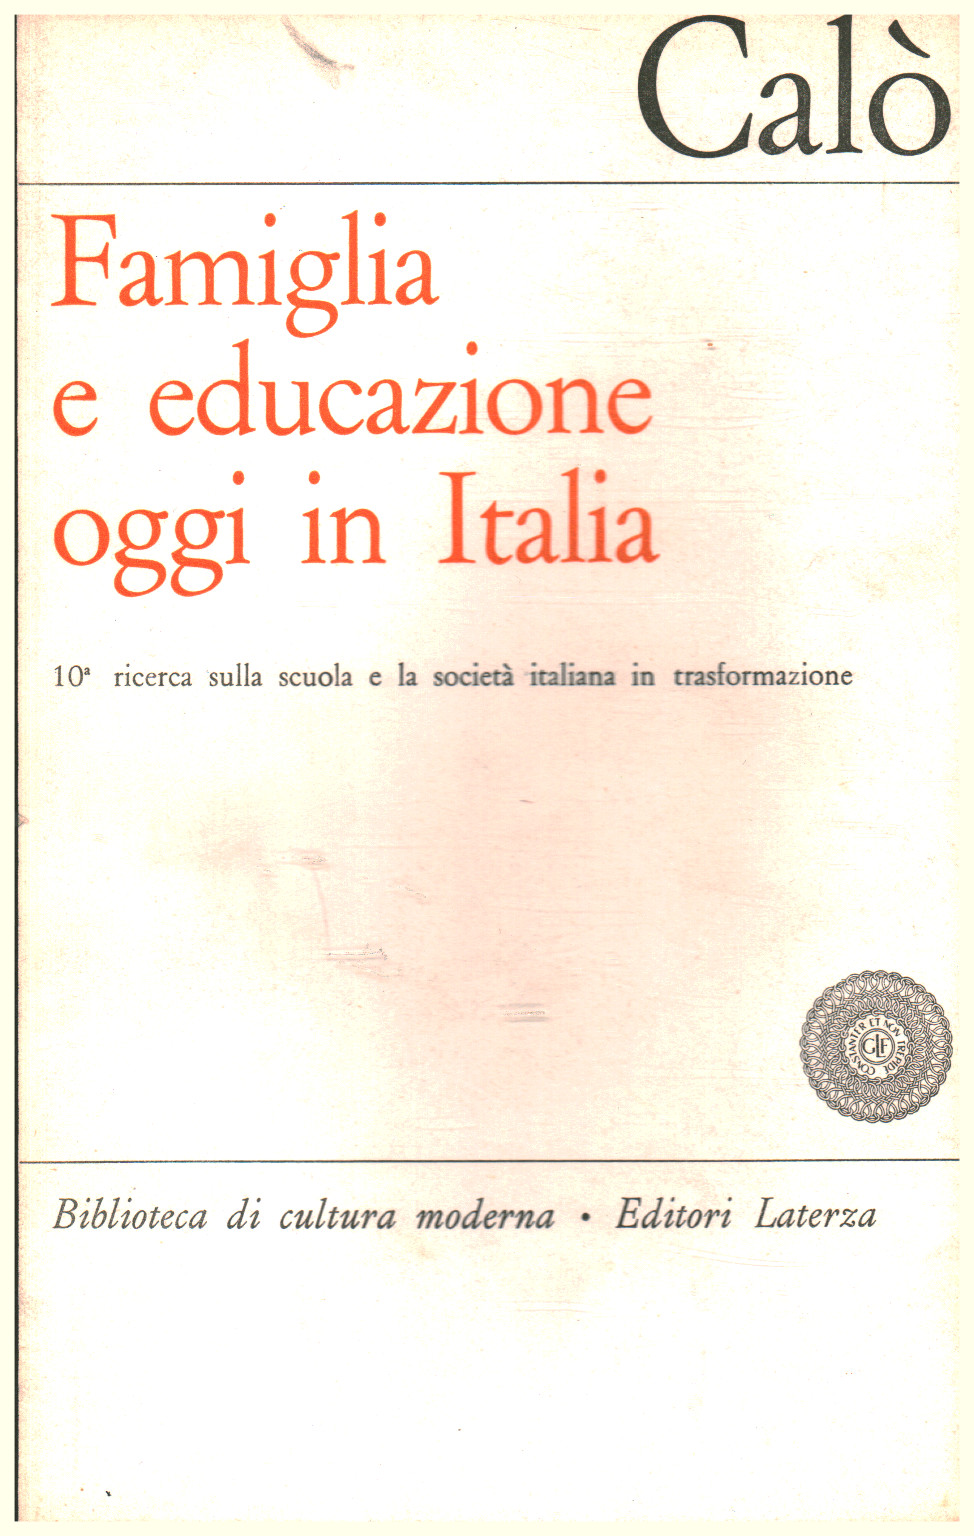 Family and education in Italy today, Giovanni Calò